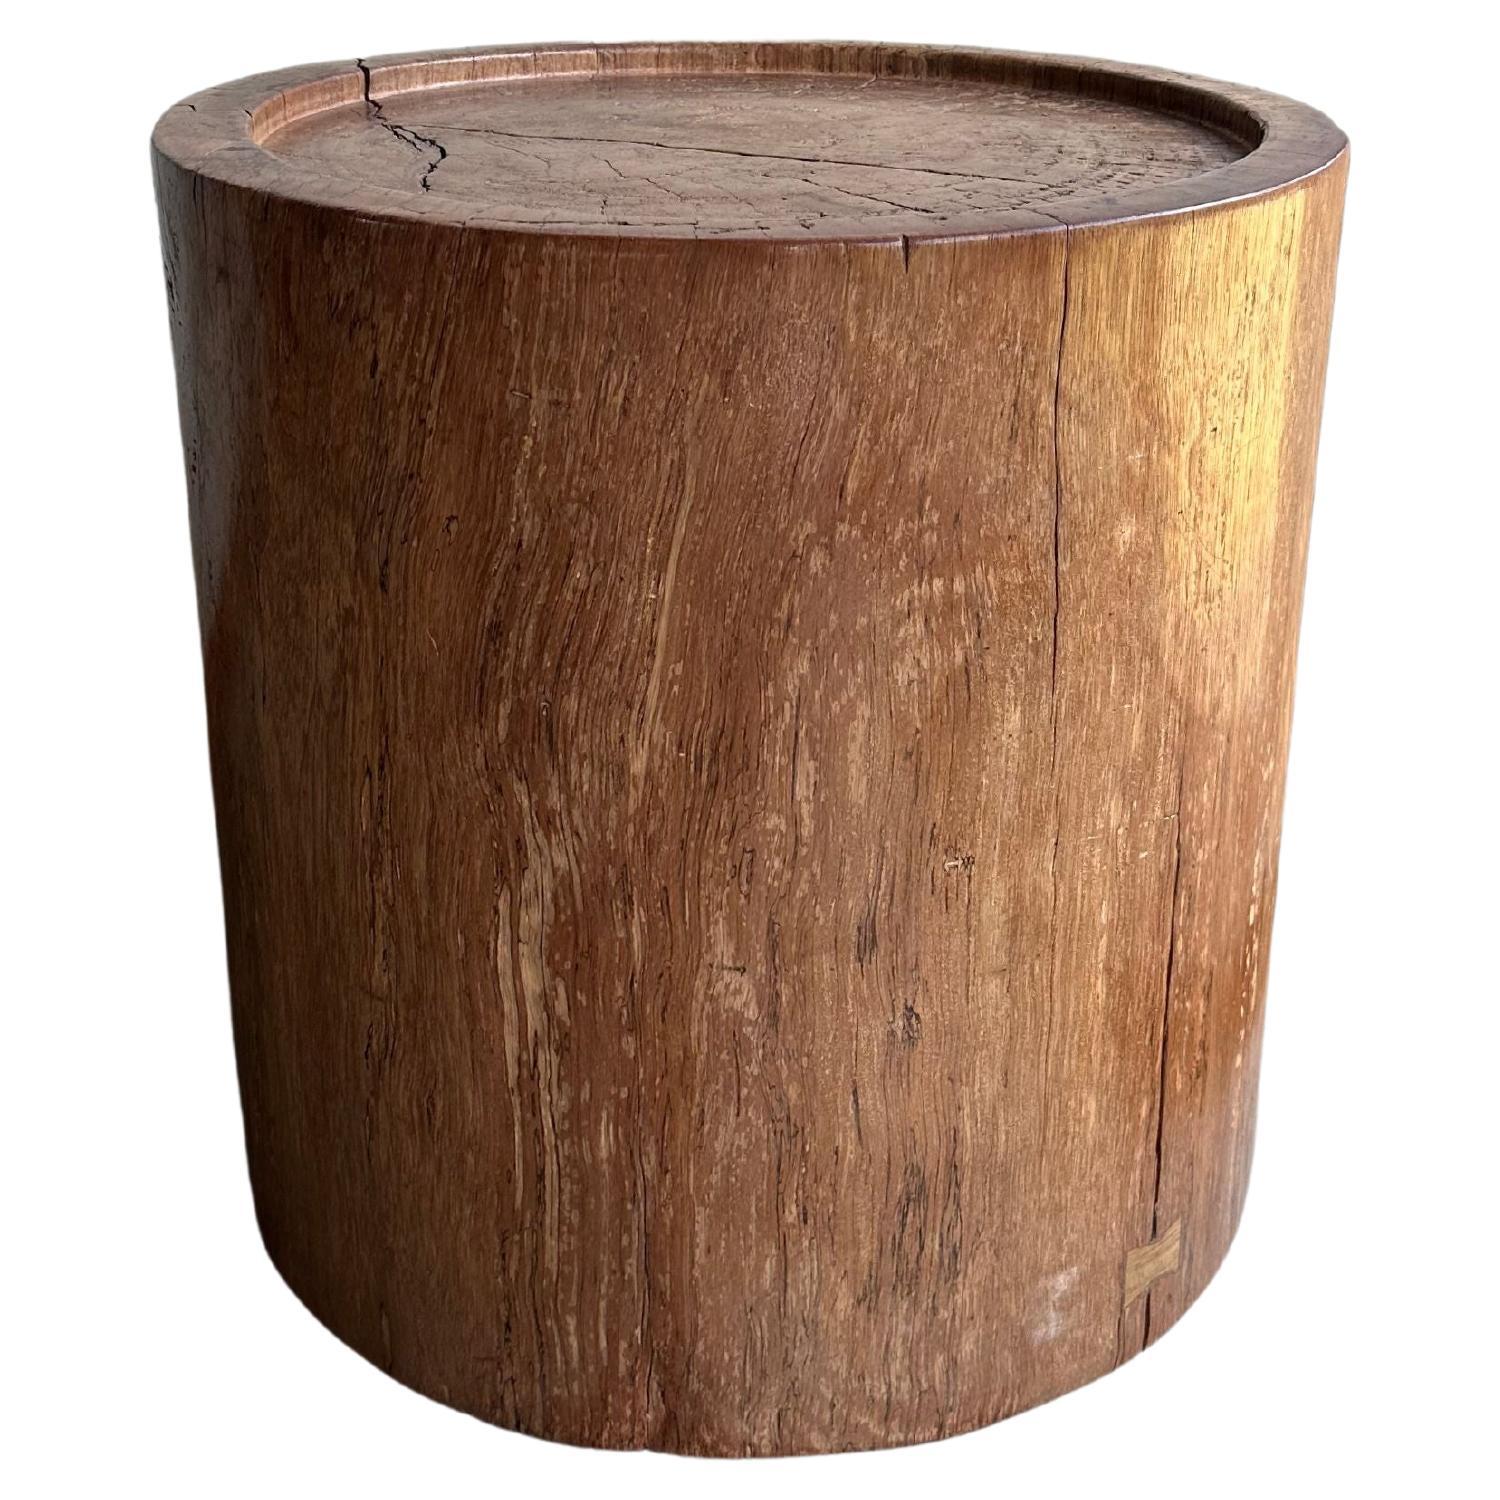 Sculptural Meranti Wood Side Table, with Stunning Wood Textures, Modern Organic For Sale